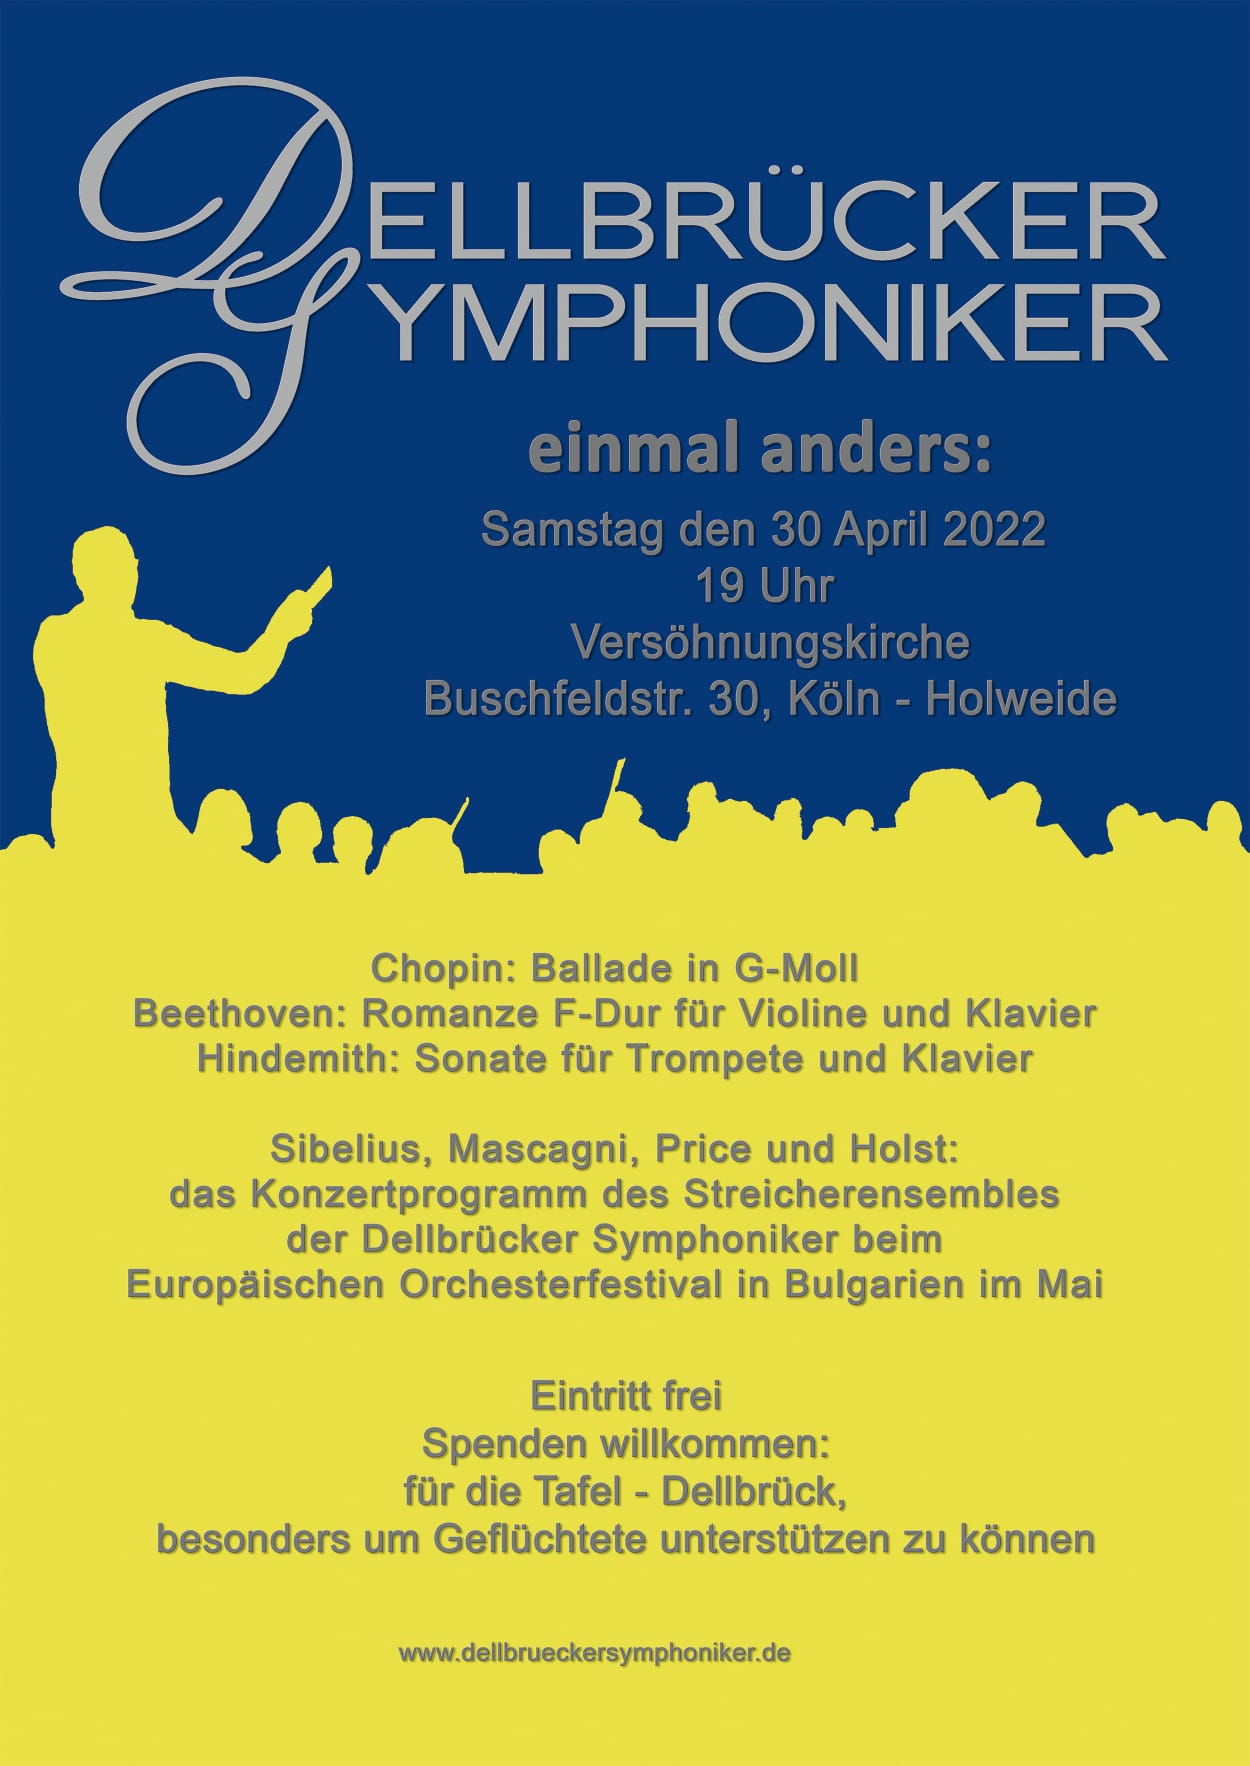 You are currently viewing Dellbrücker Symphoniker einmal anders